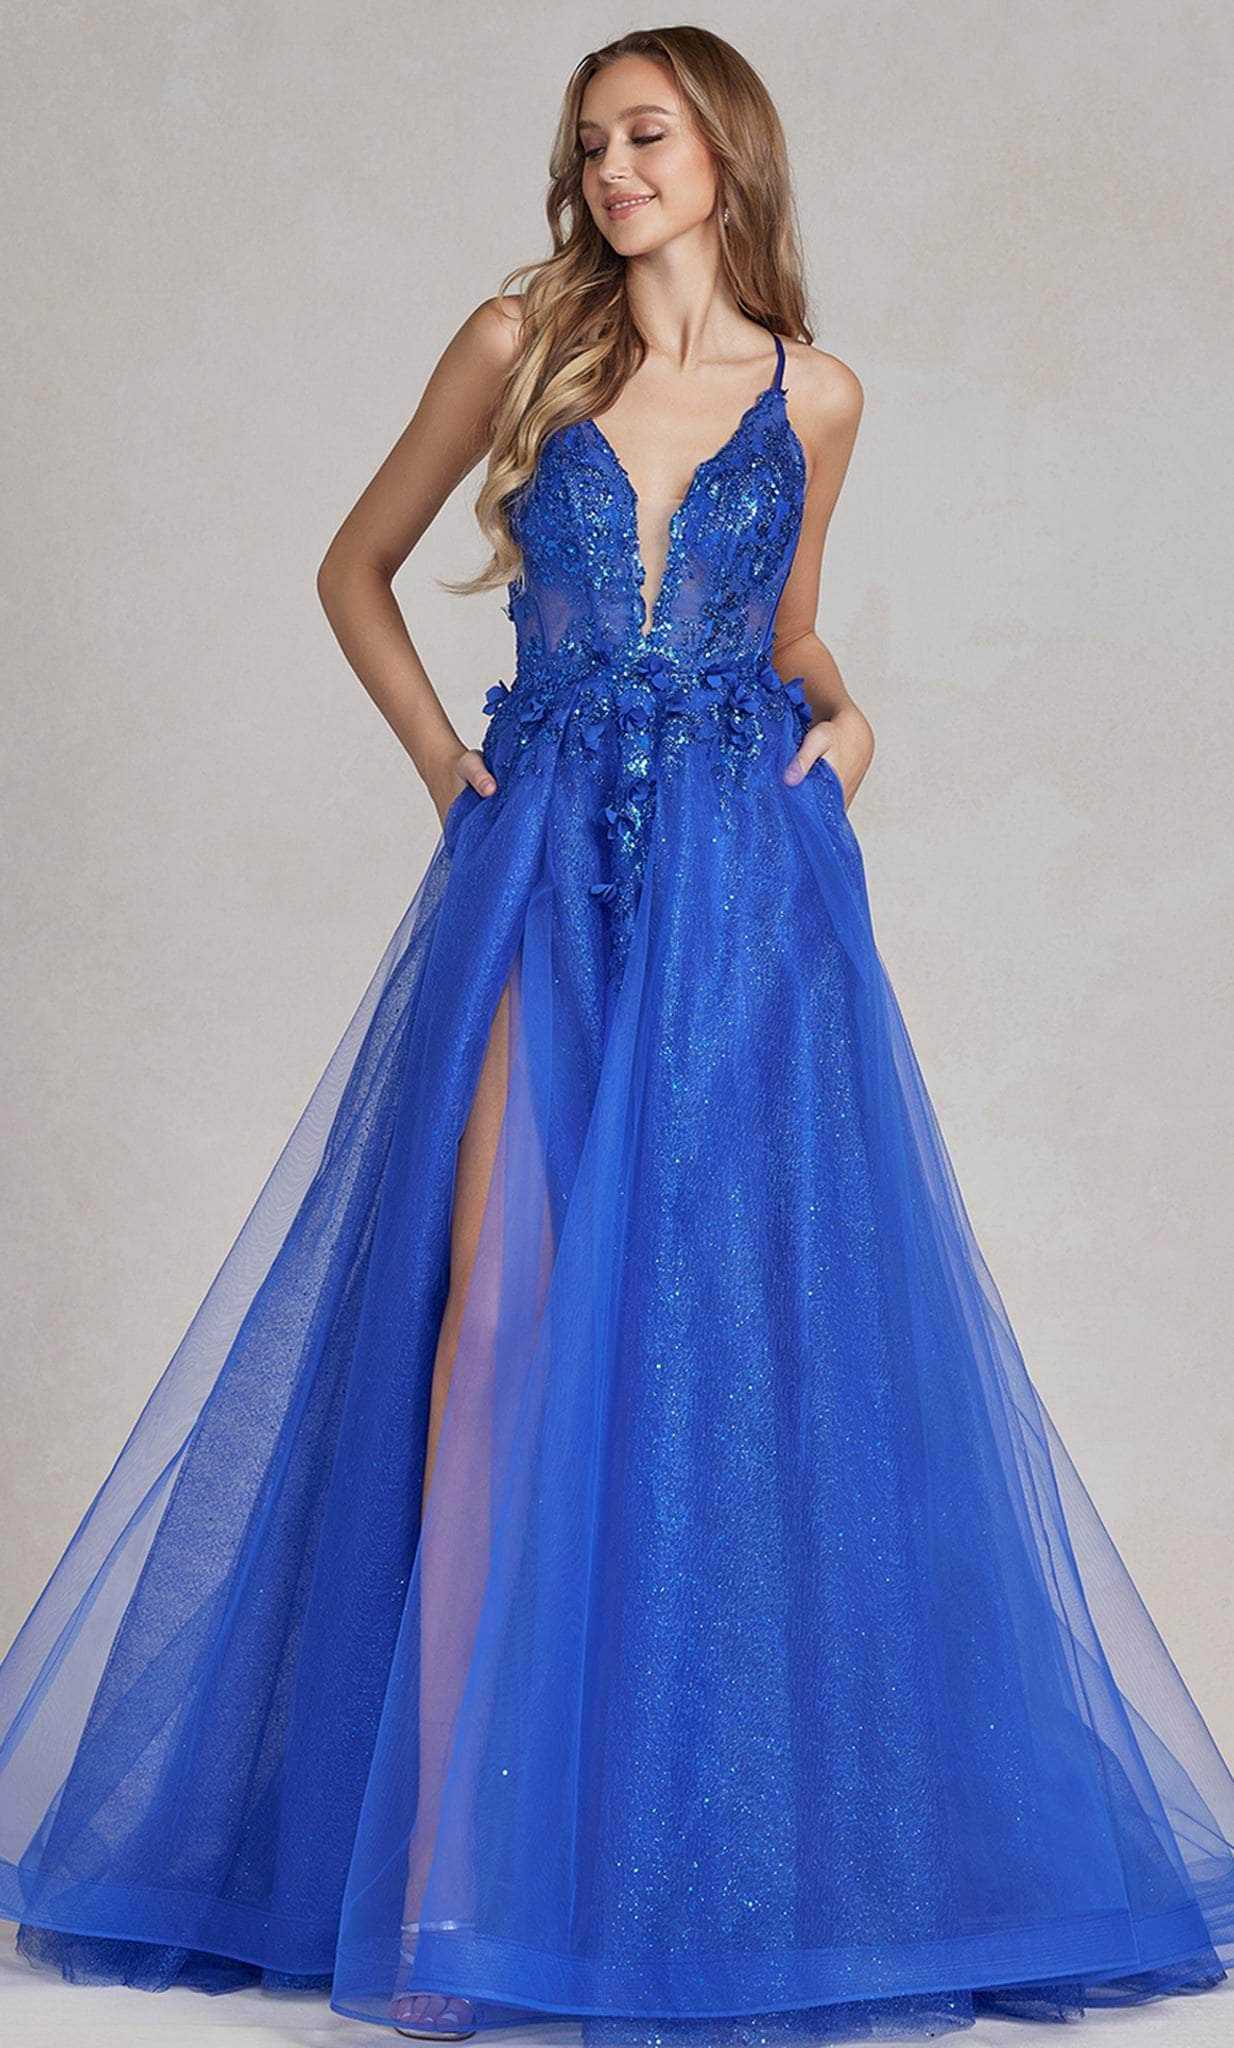 Nox Anabel, Nox Anabel C1113 - Tulle Skirt Prom Gown